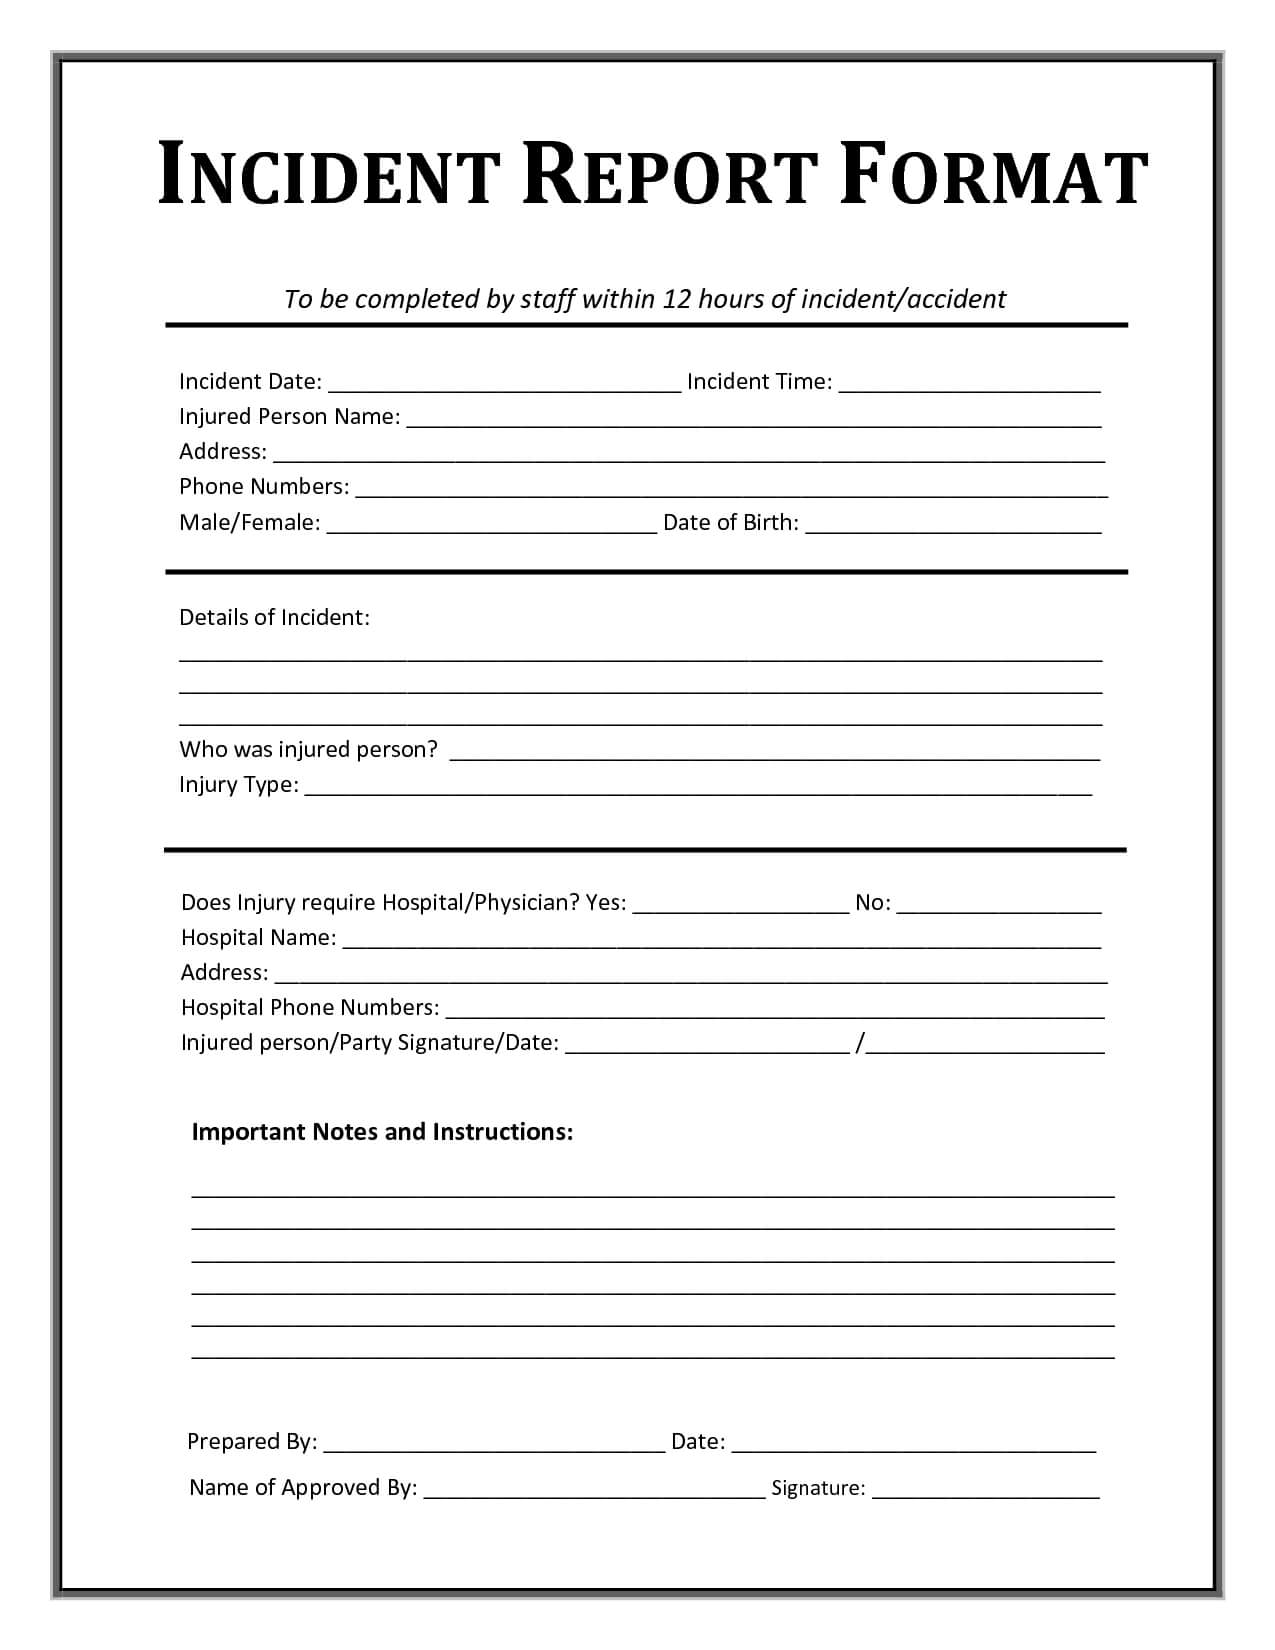 Incident Report Form Template Microsoft Excel | Report For Health And Safety Incident Report Form Template